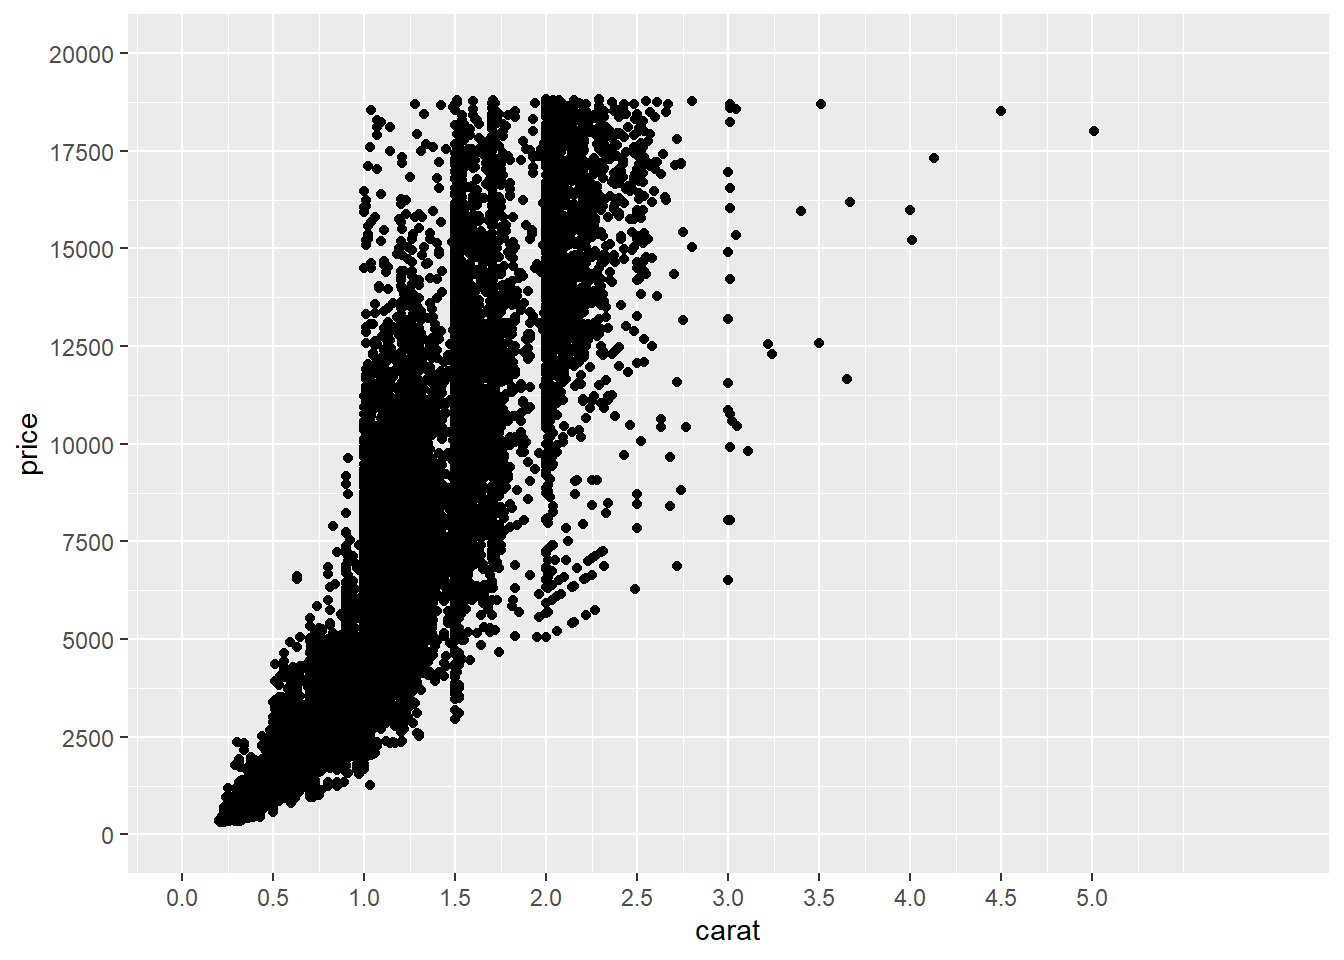 A ggplot object with a geom_point layer, the price of diamonds by their carat, x and y axes changed